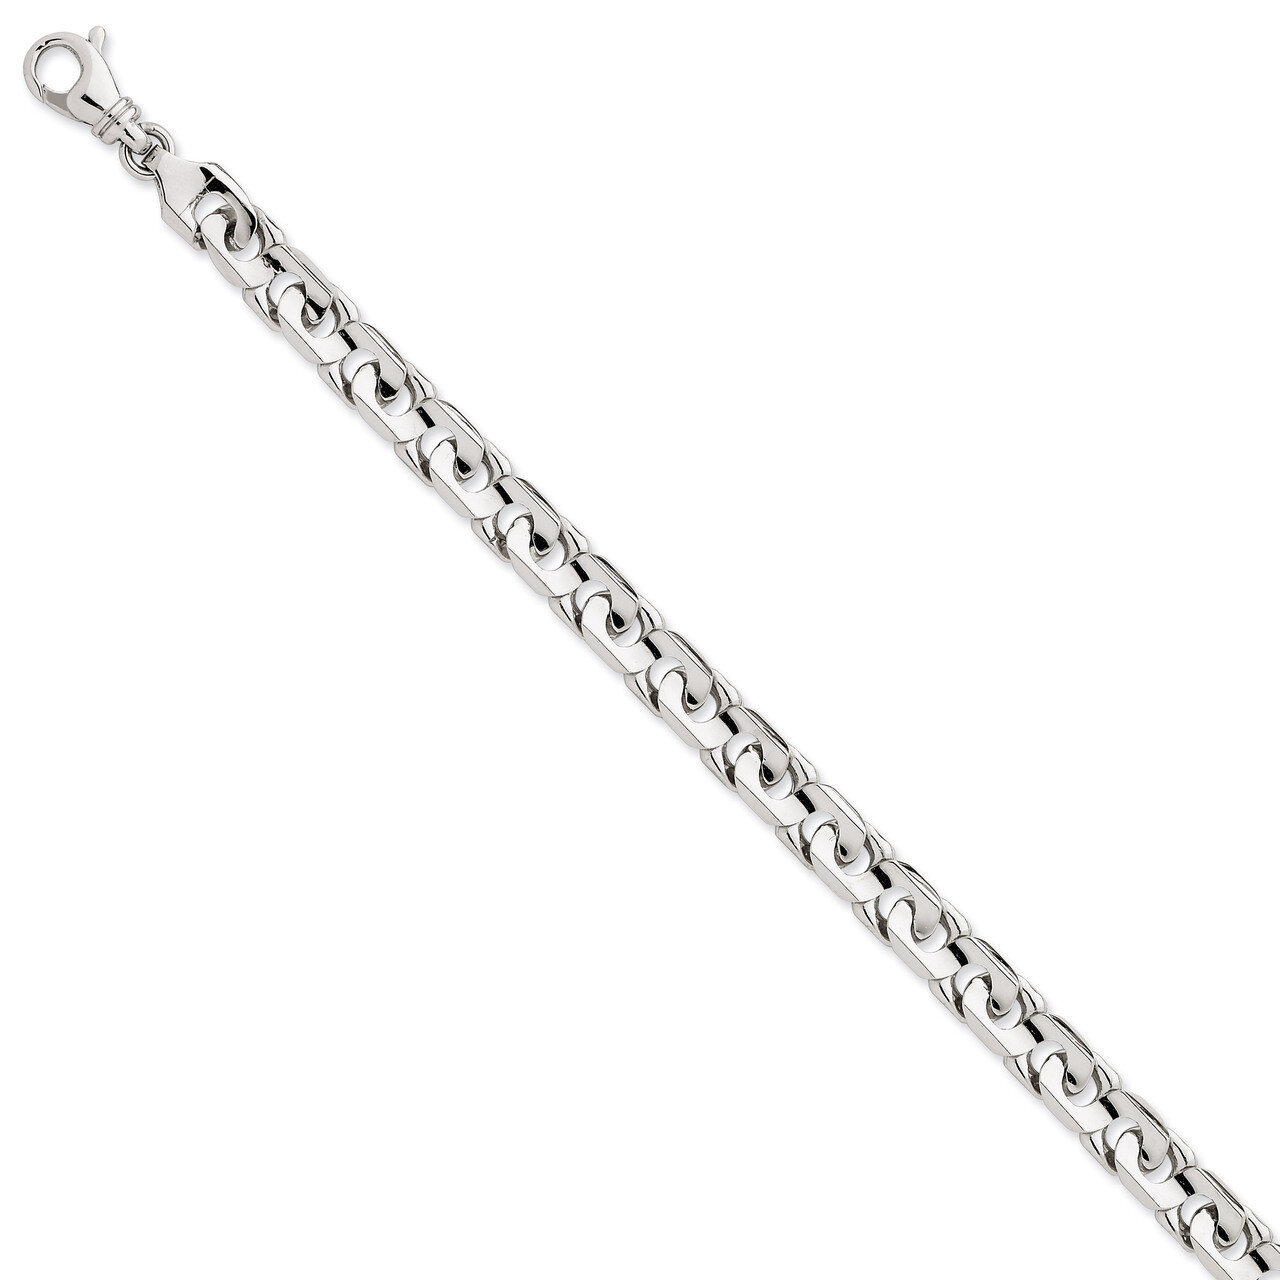 8mm Hand-Polished Fancy Link Chain 24 Inch 14k White Gold WLK178-24